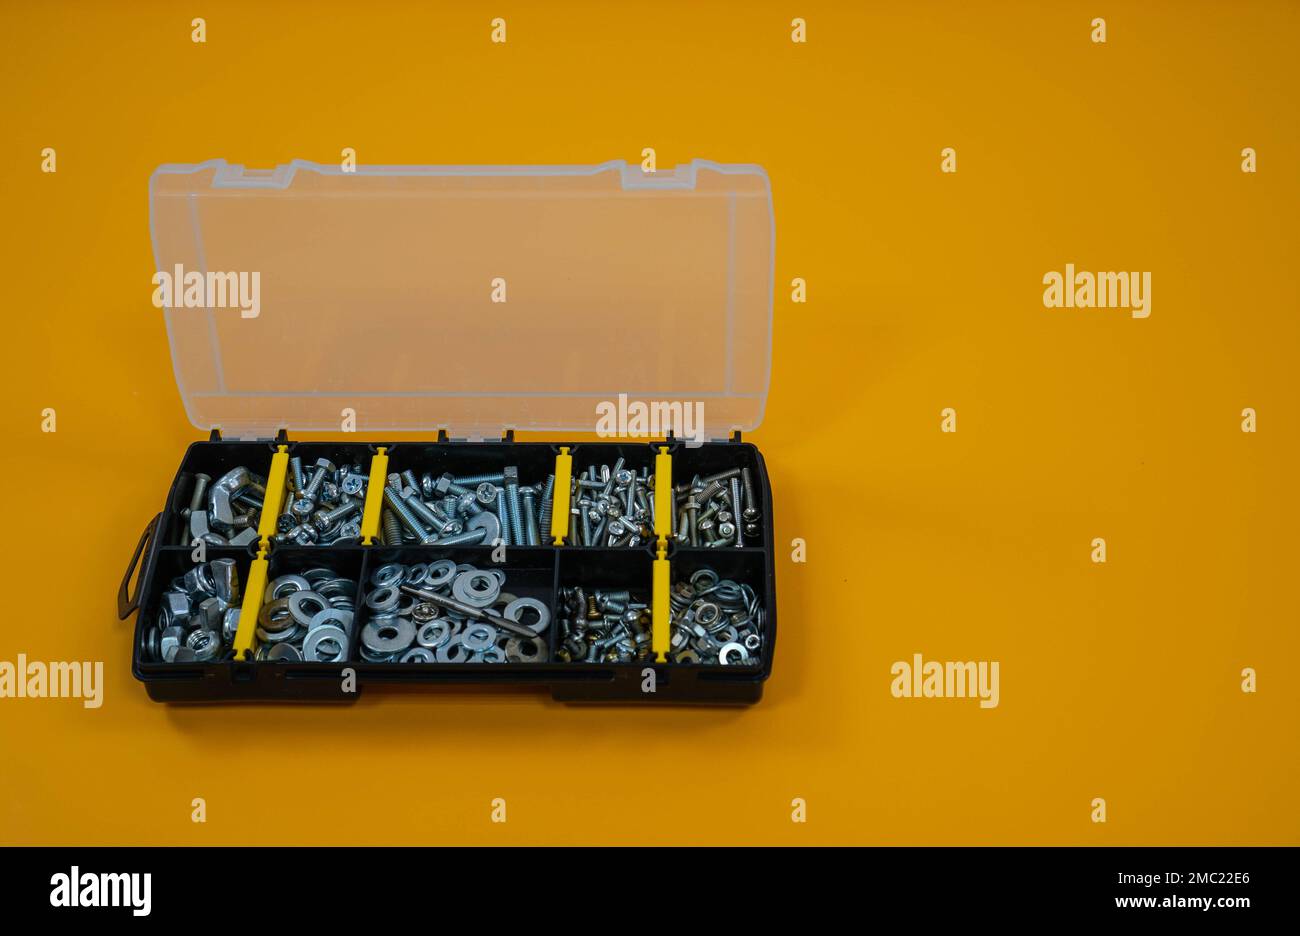 Yellow storage case with screws, nuts, bolts, nails and other small tools  for handyman, close up 12799187 Stock Photo at Vecteezy